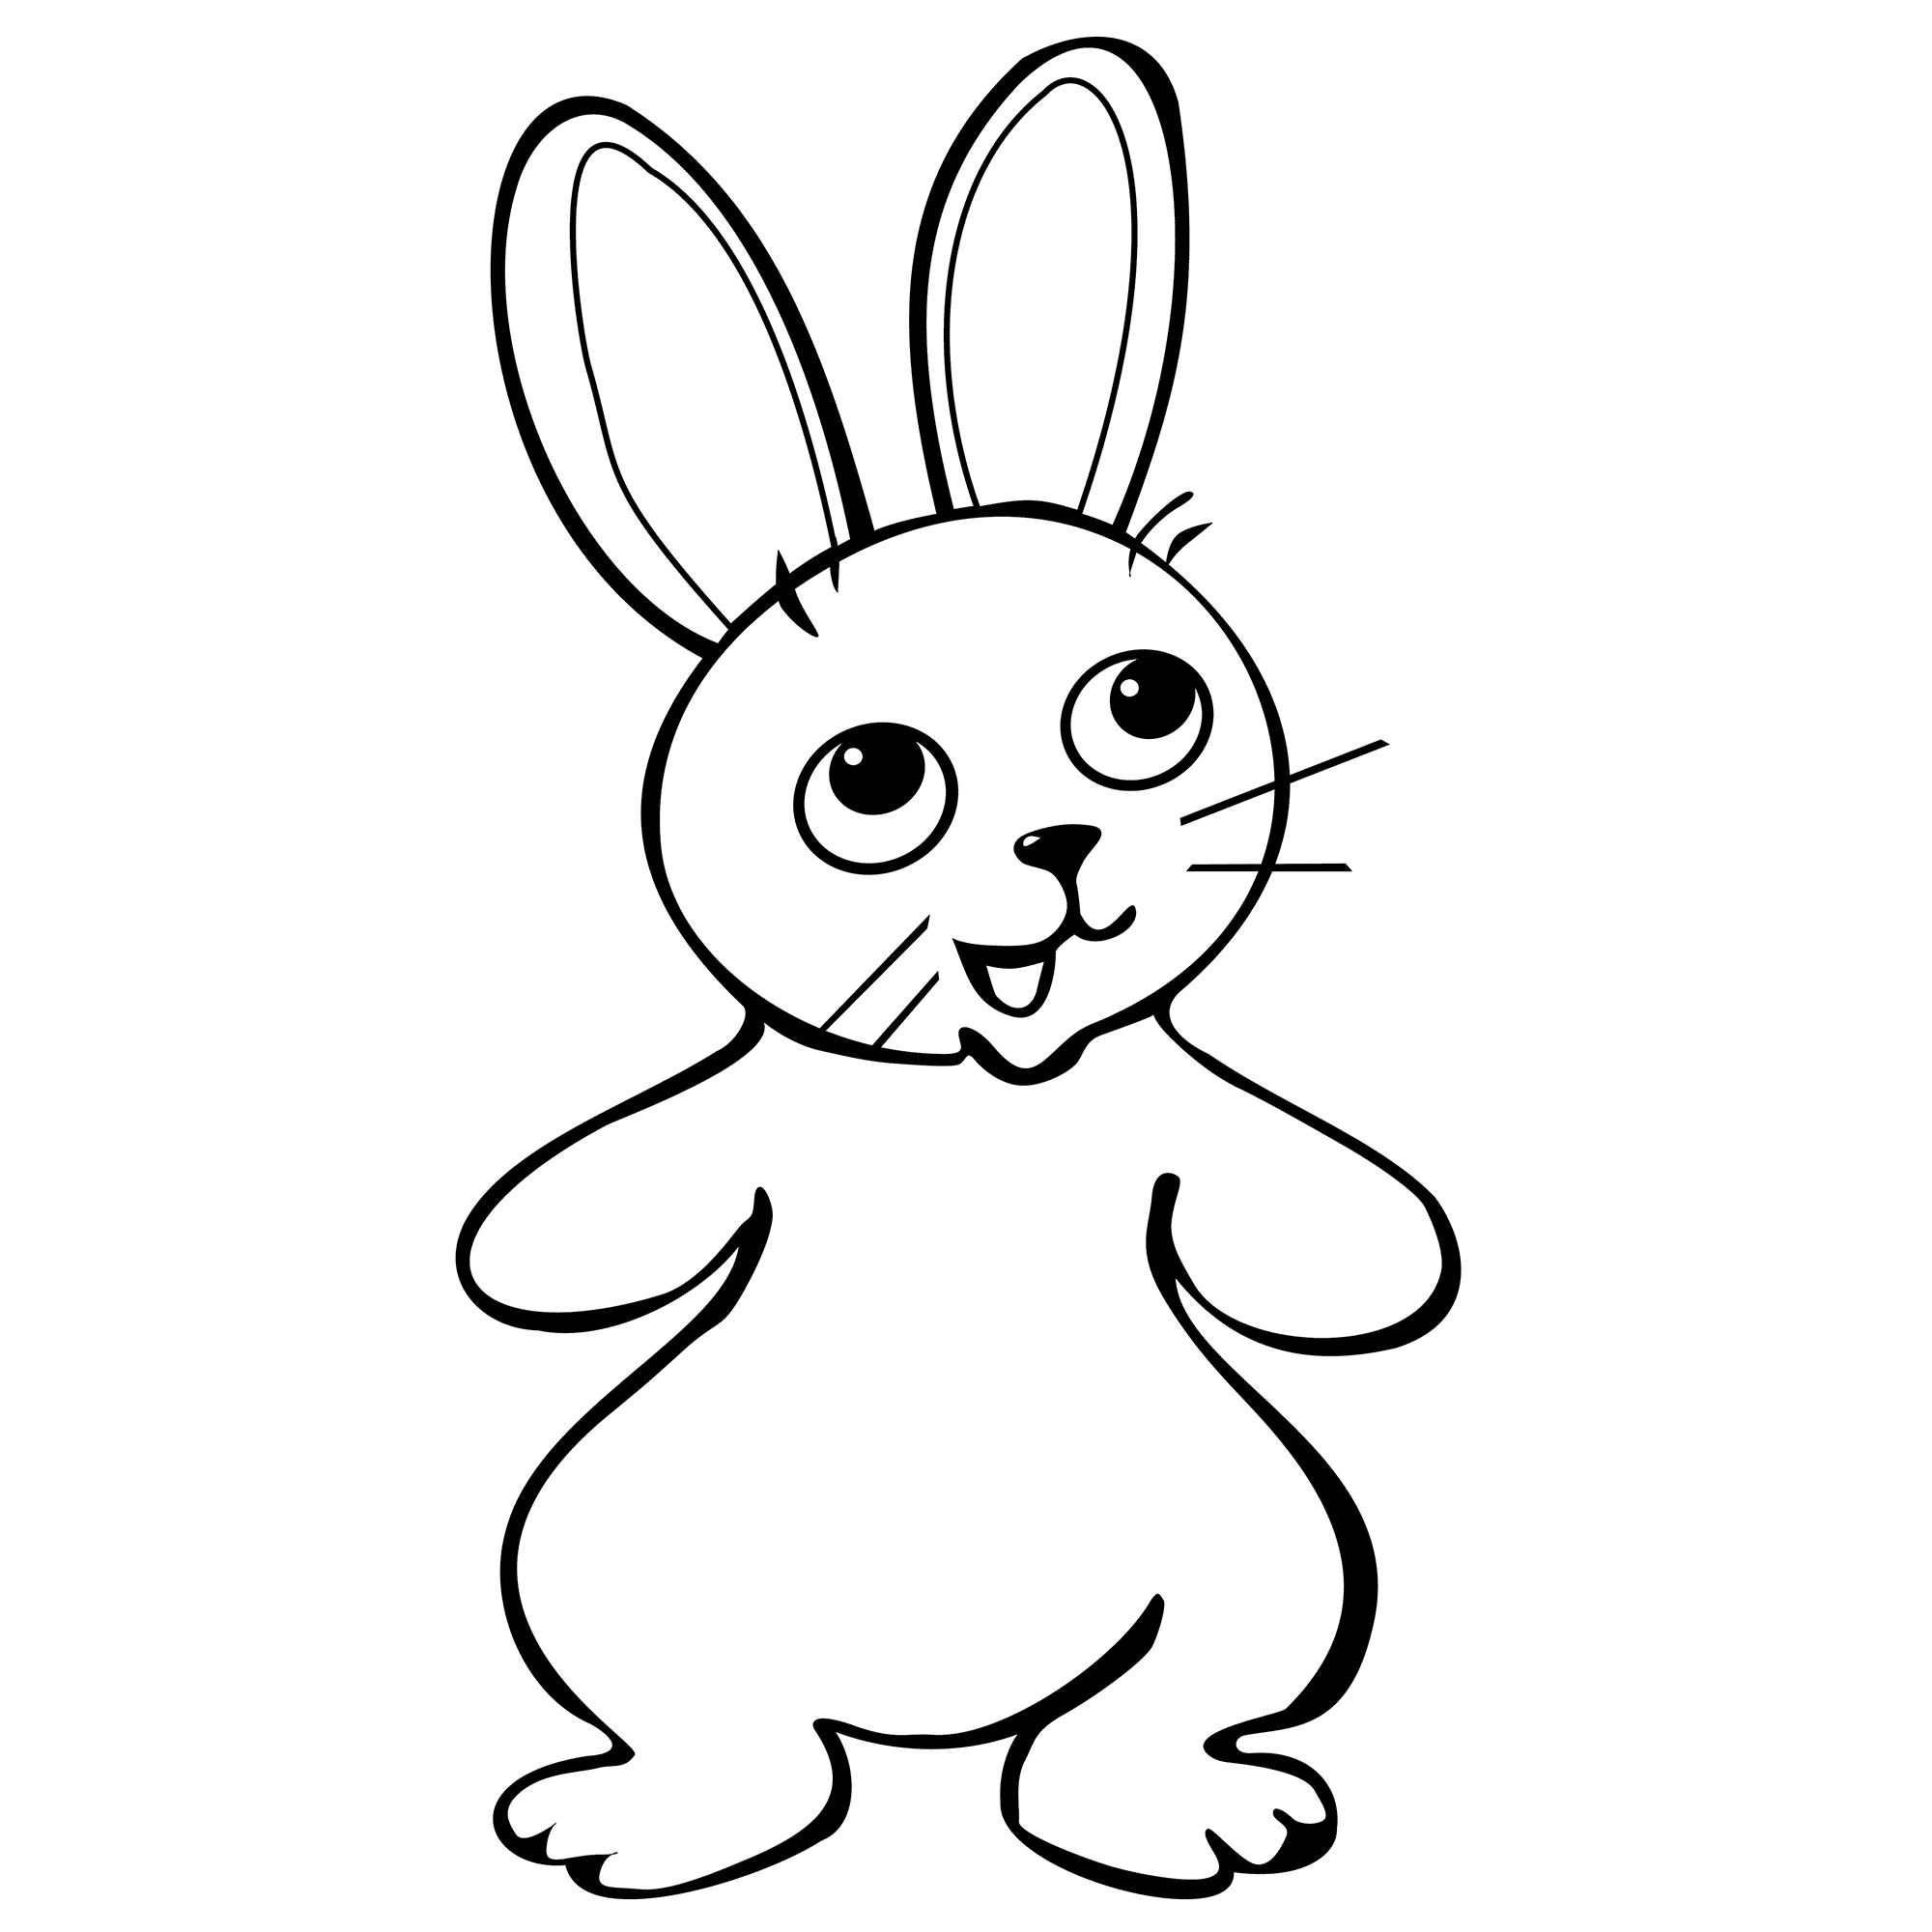 Baby Bunny Coloring Pages Printable : Rabbits Coloring Pages Free Coloring Pages